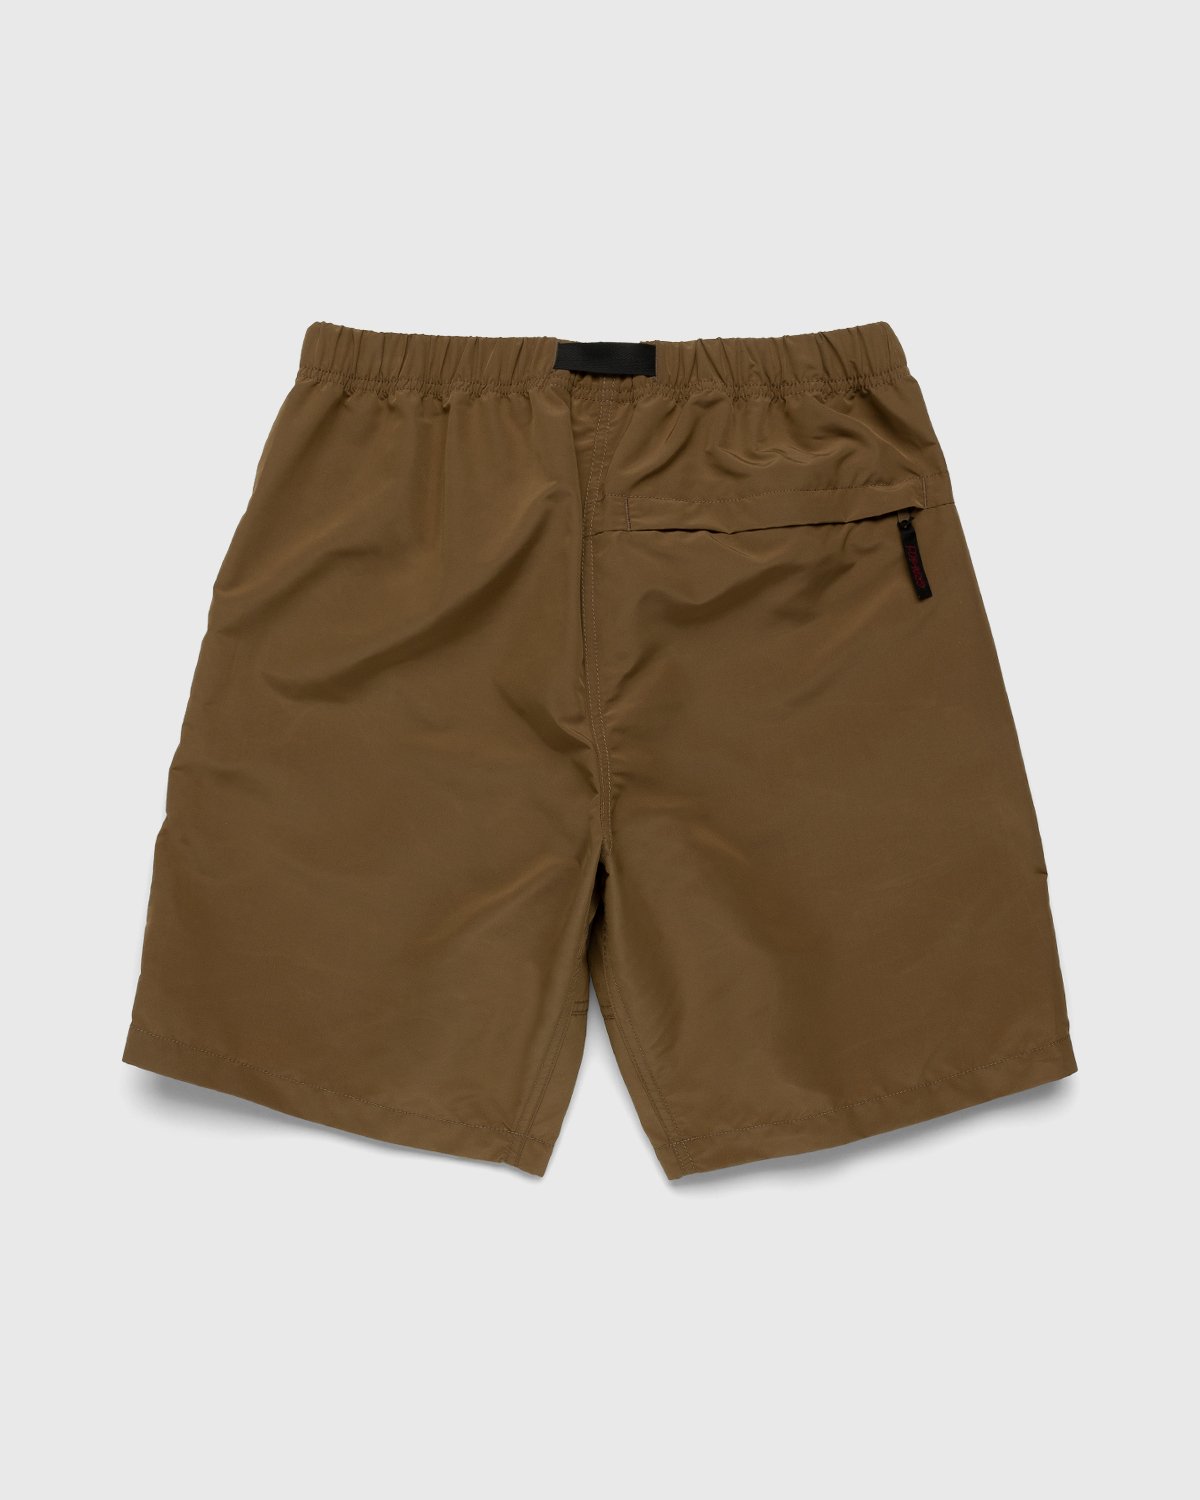 Gramicci x Highsnobiety - HS Sports Shell Packable Shorts Tan - Clothing - Brown - Image 2